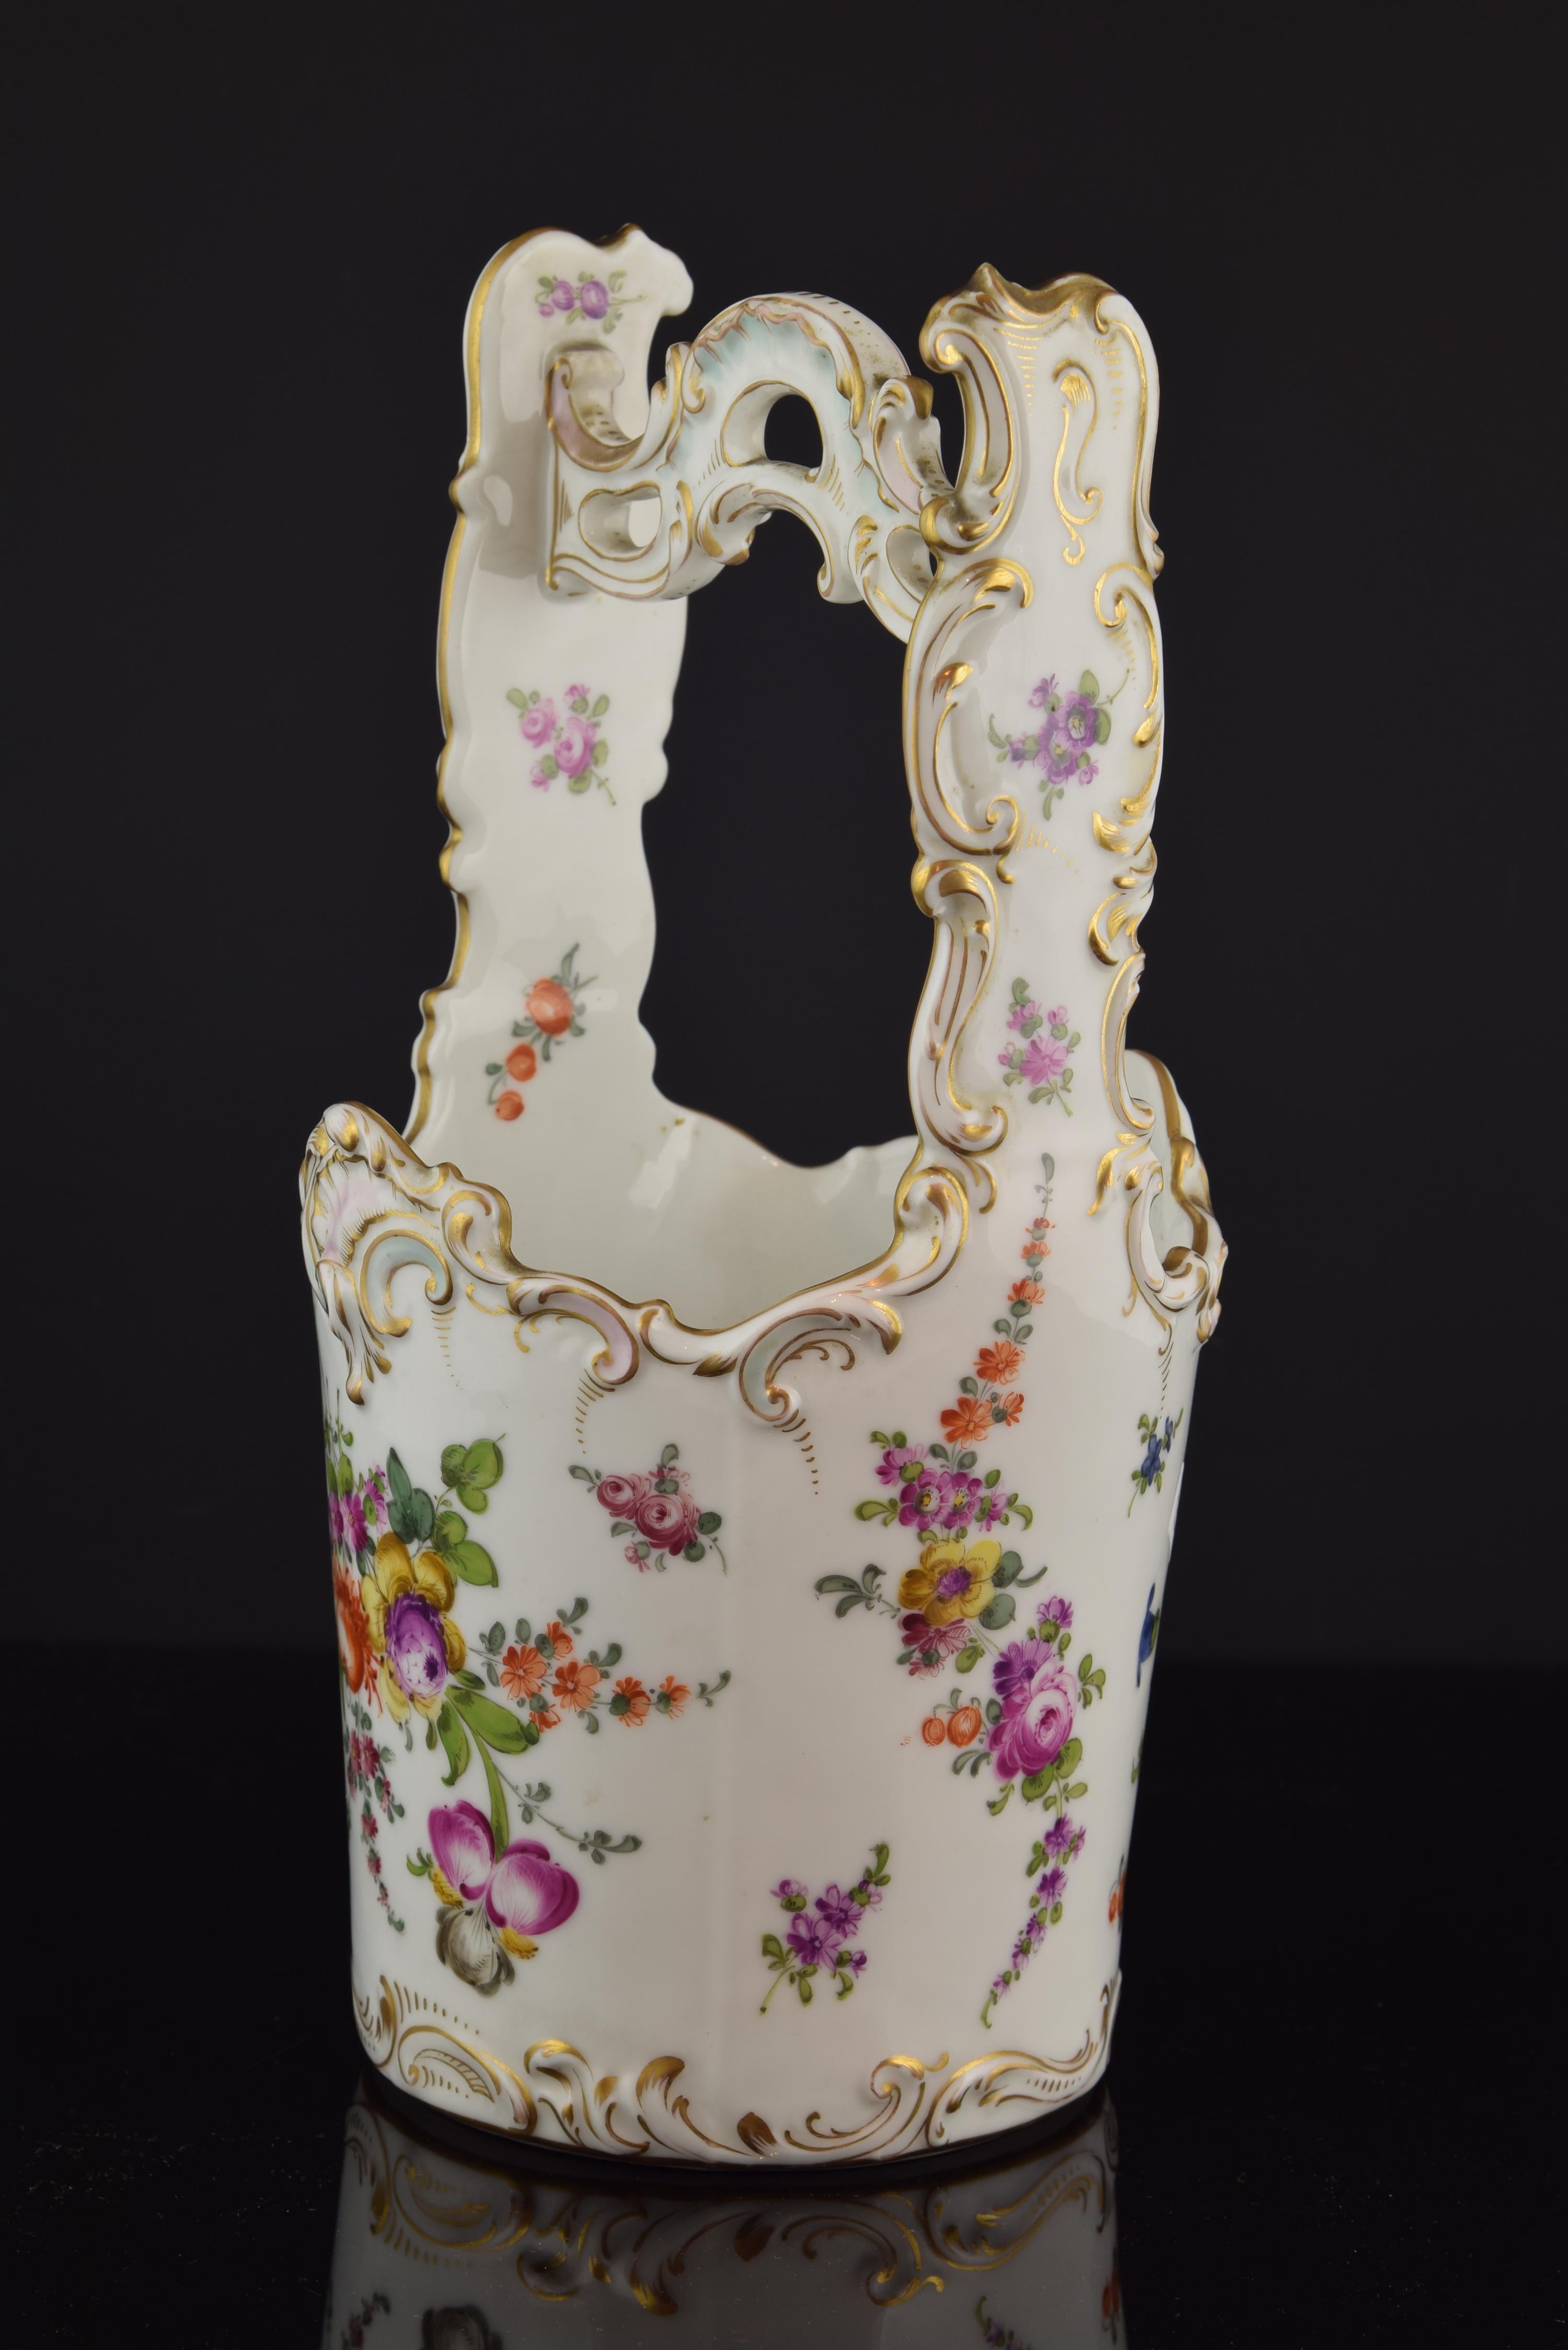 Neoclassical Revival Porcelain Centerpiece, circa Late 19th Century For Sale